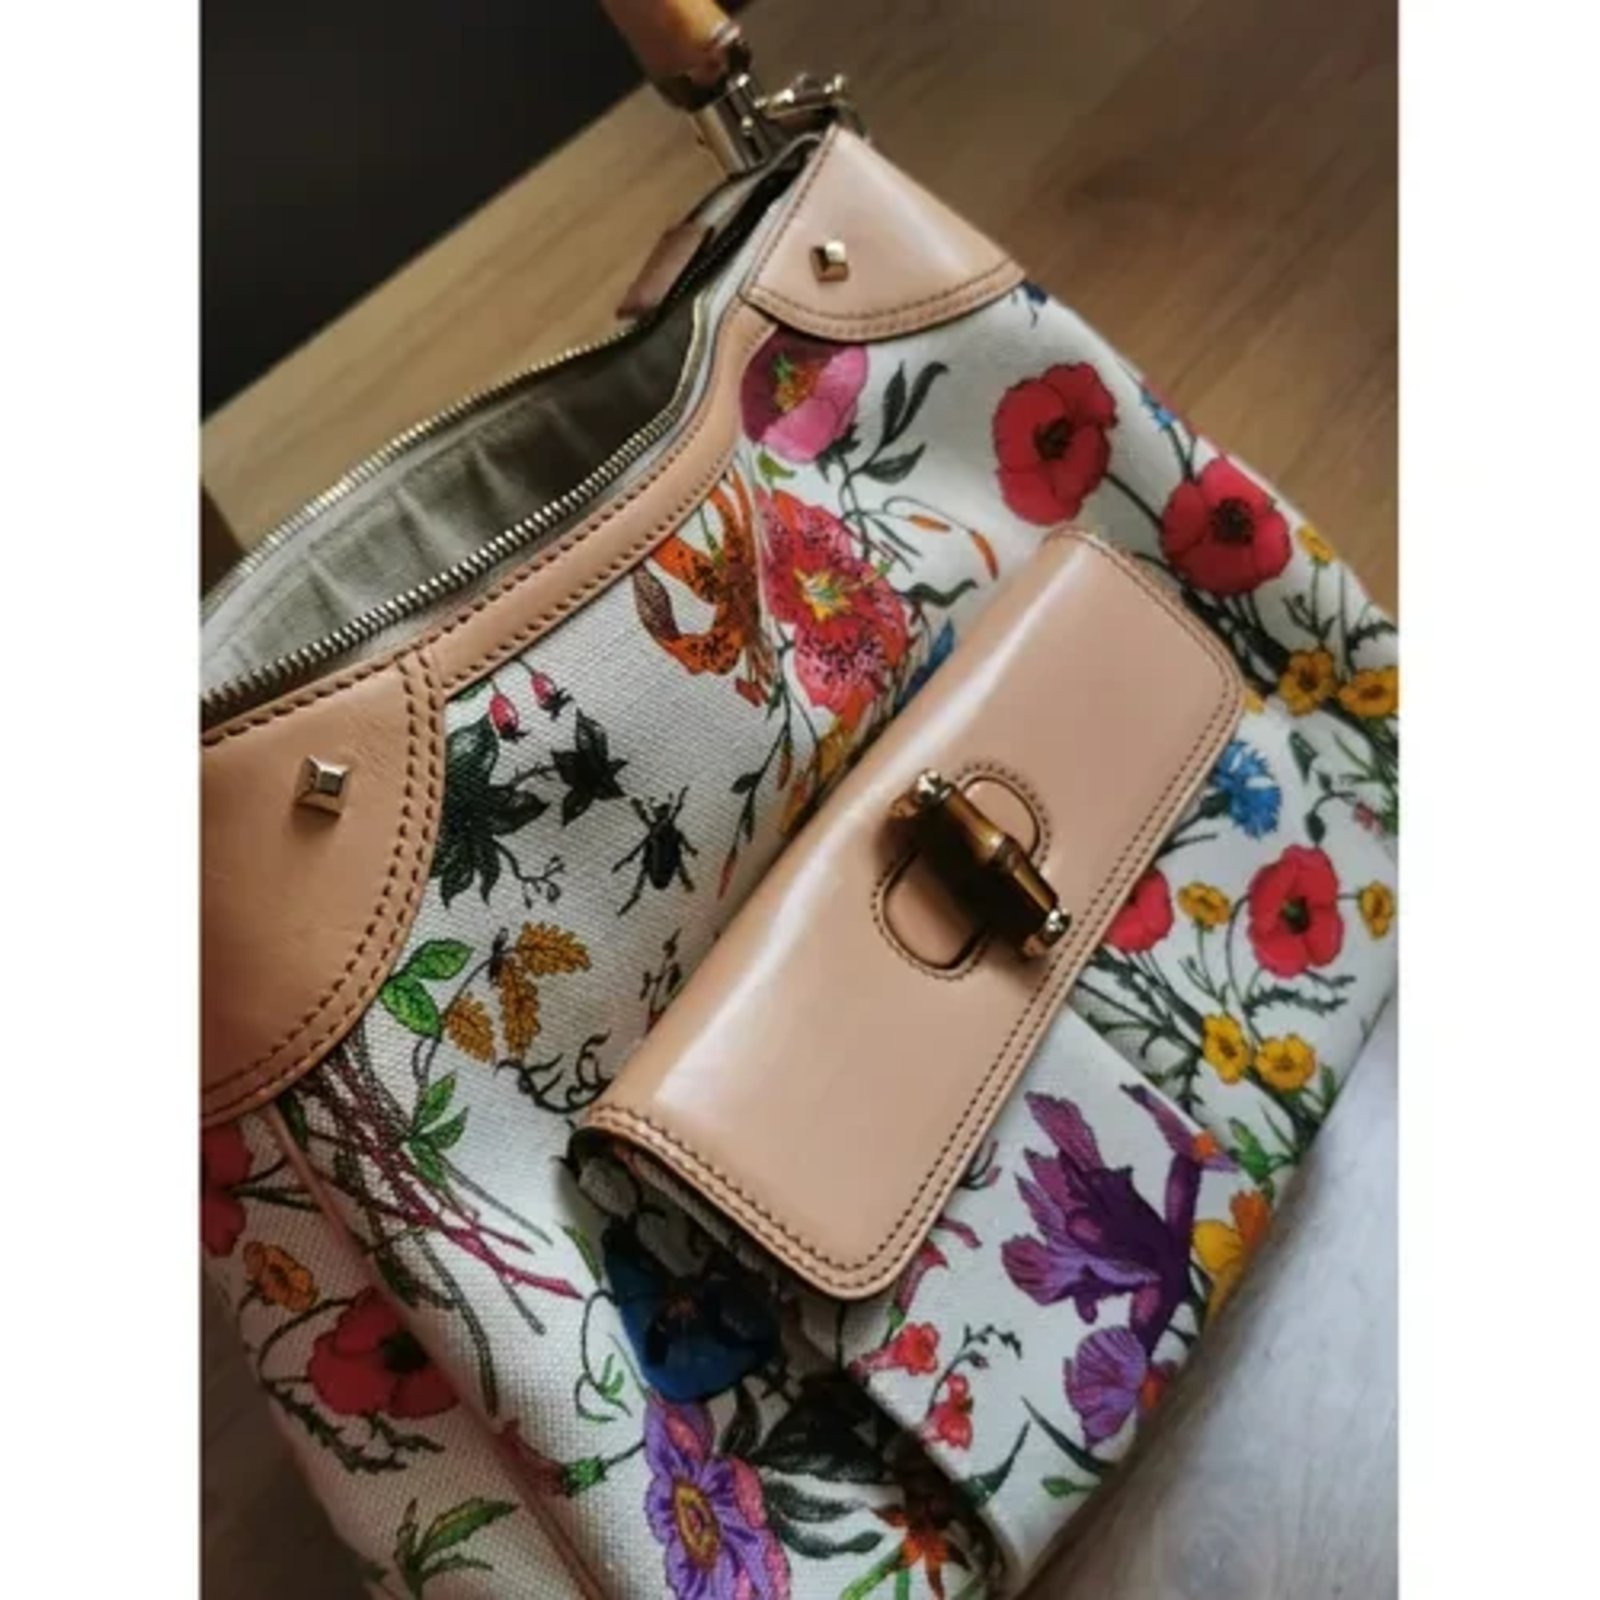 Gucci Jackie Flora - 5 For Sale on 1stDibs | gucci jackie floral, gucci  floral jackie bag, gucci jackie floral bag